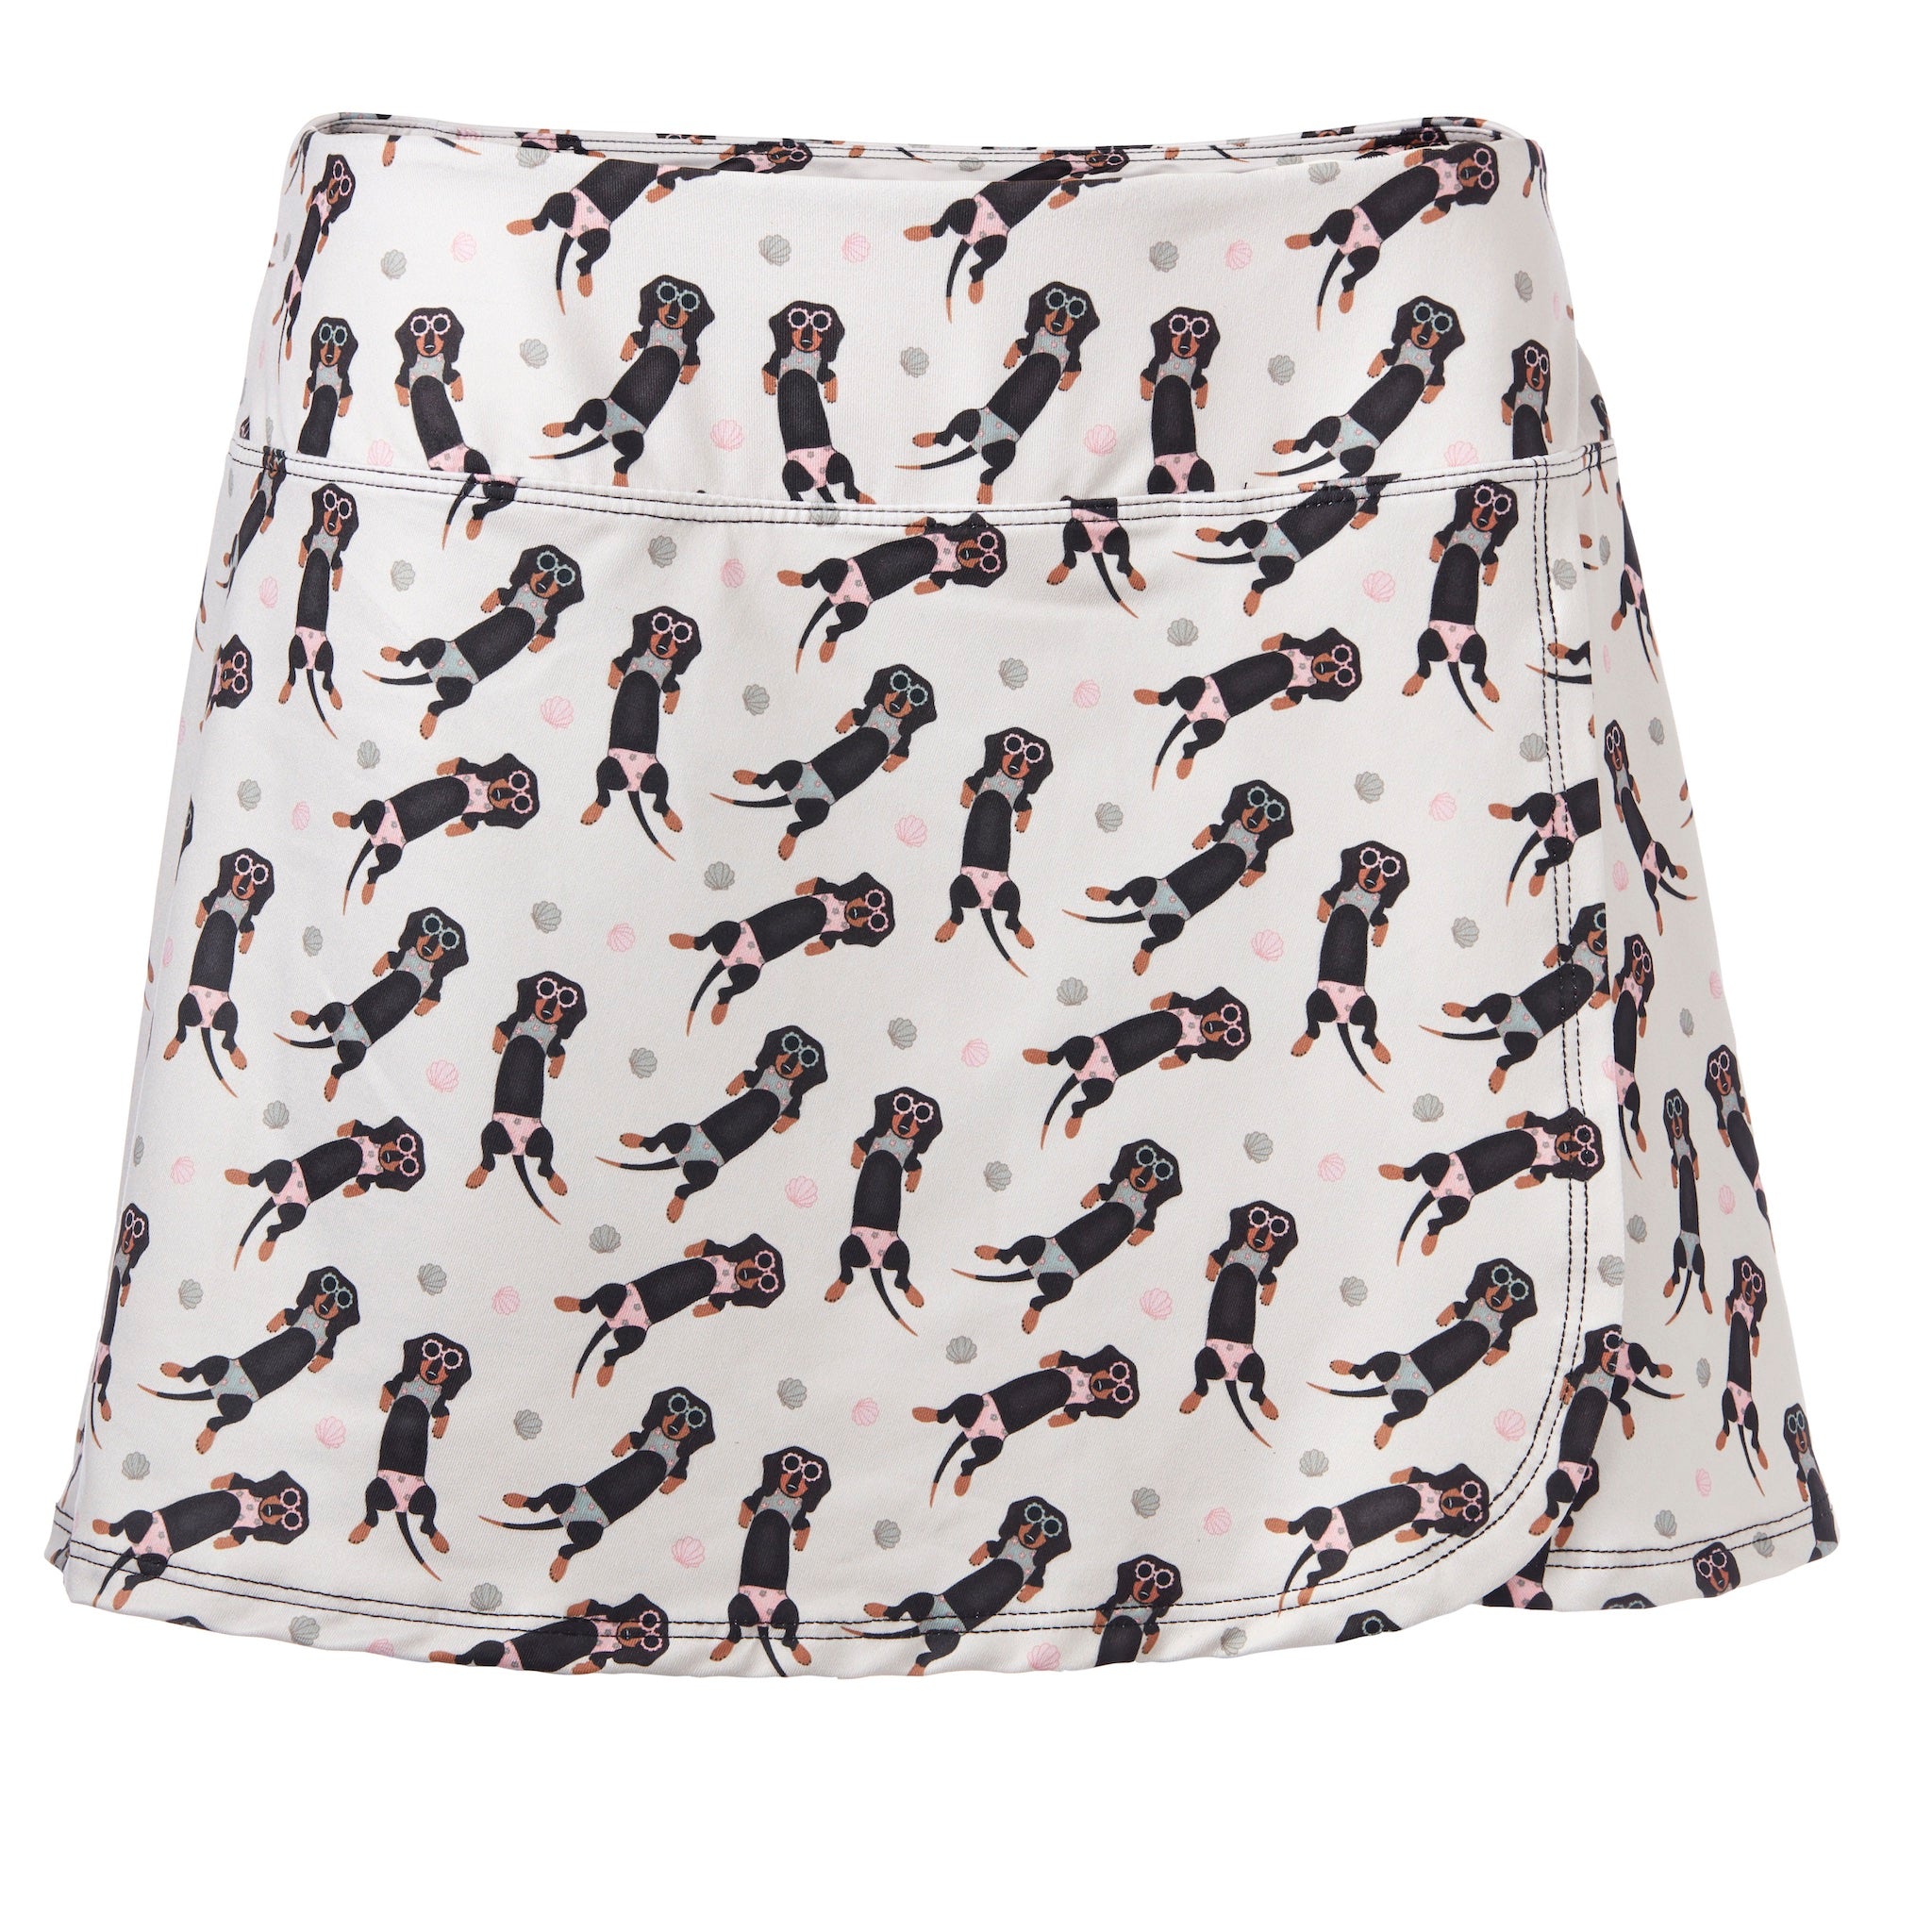 Tee Time Skirt-Hot Dogs